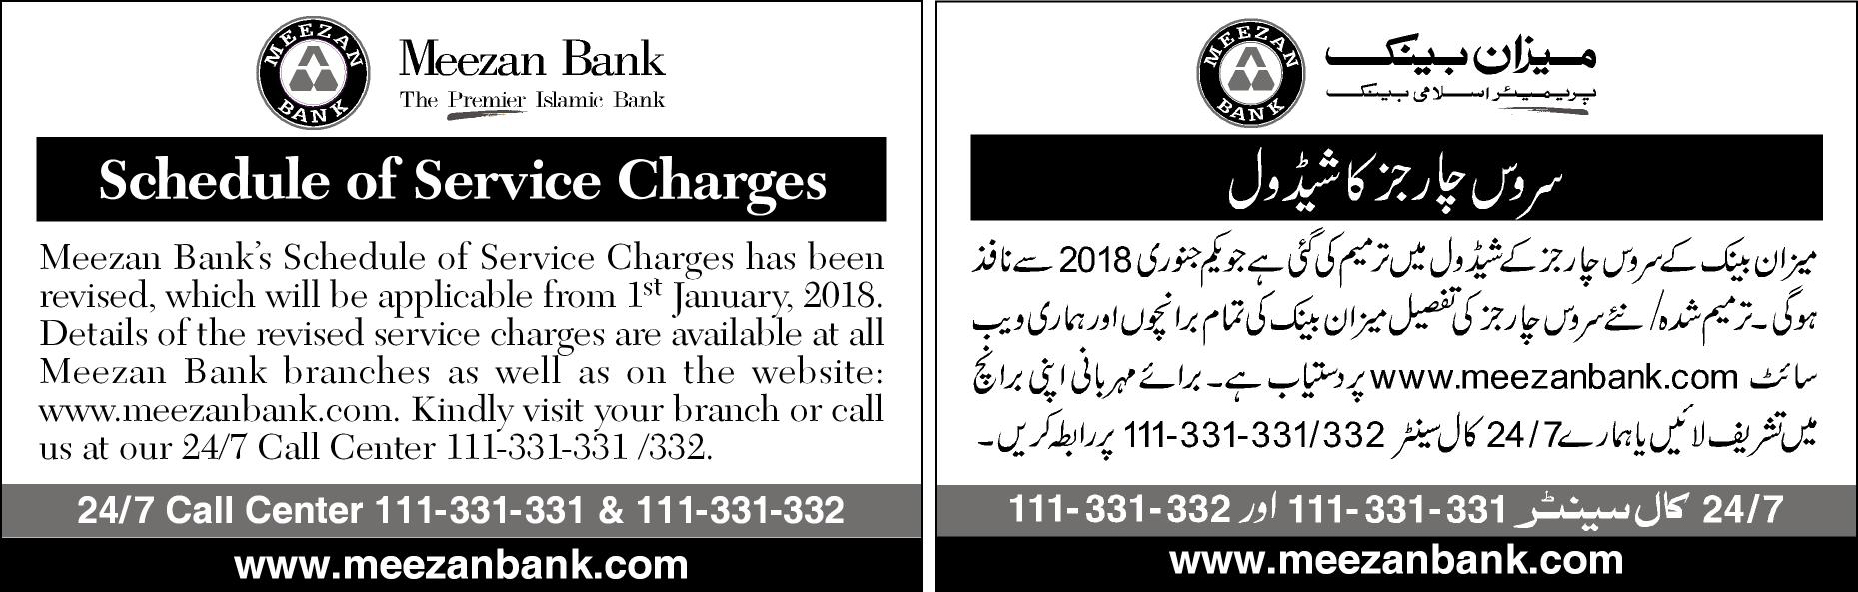 Schedule of Service Charges(01-12-17)